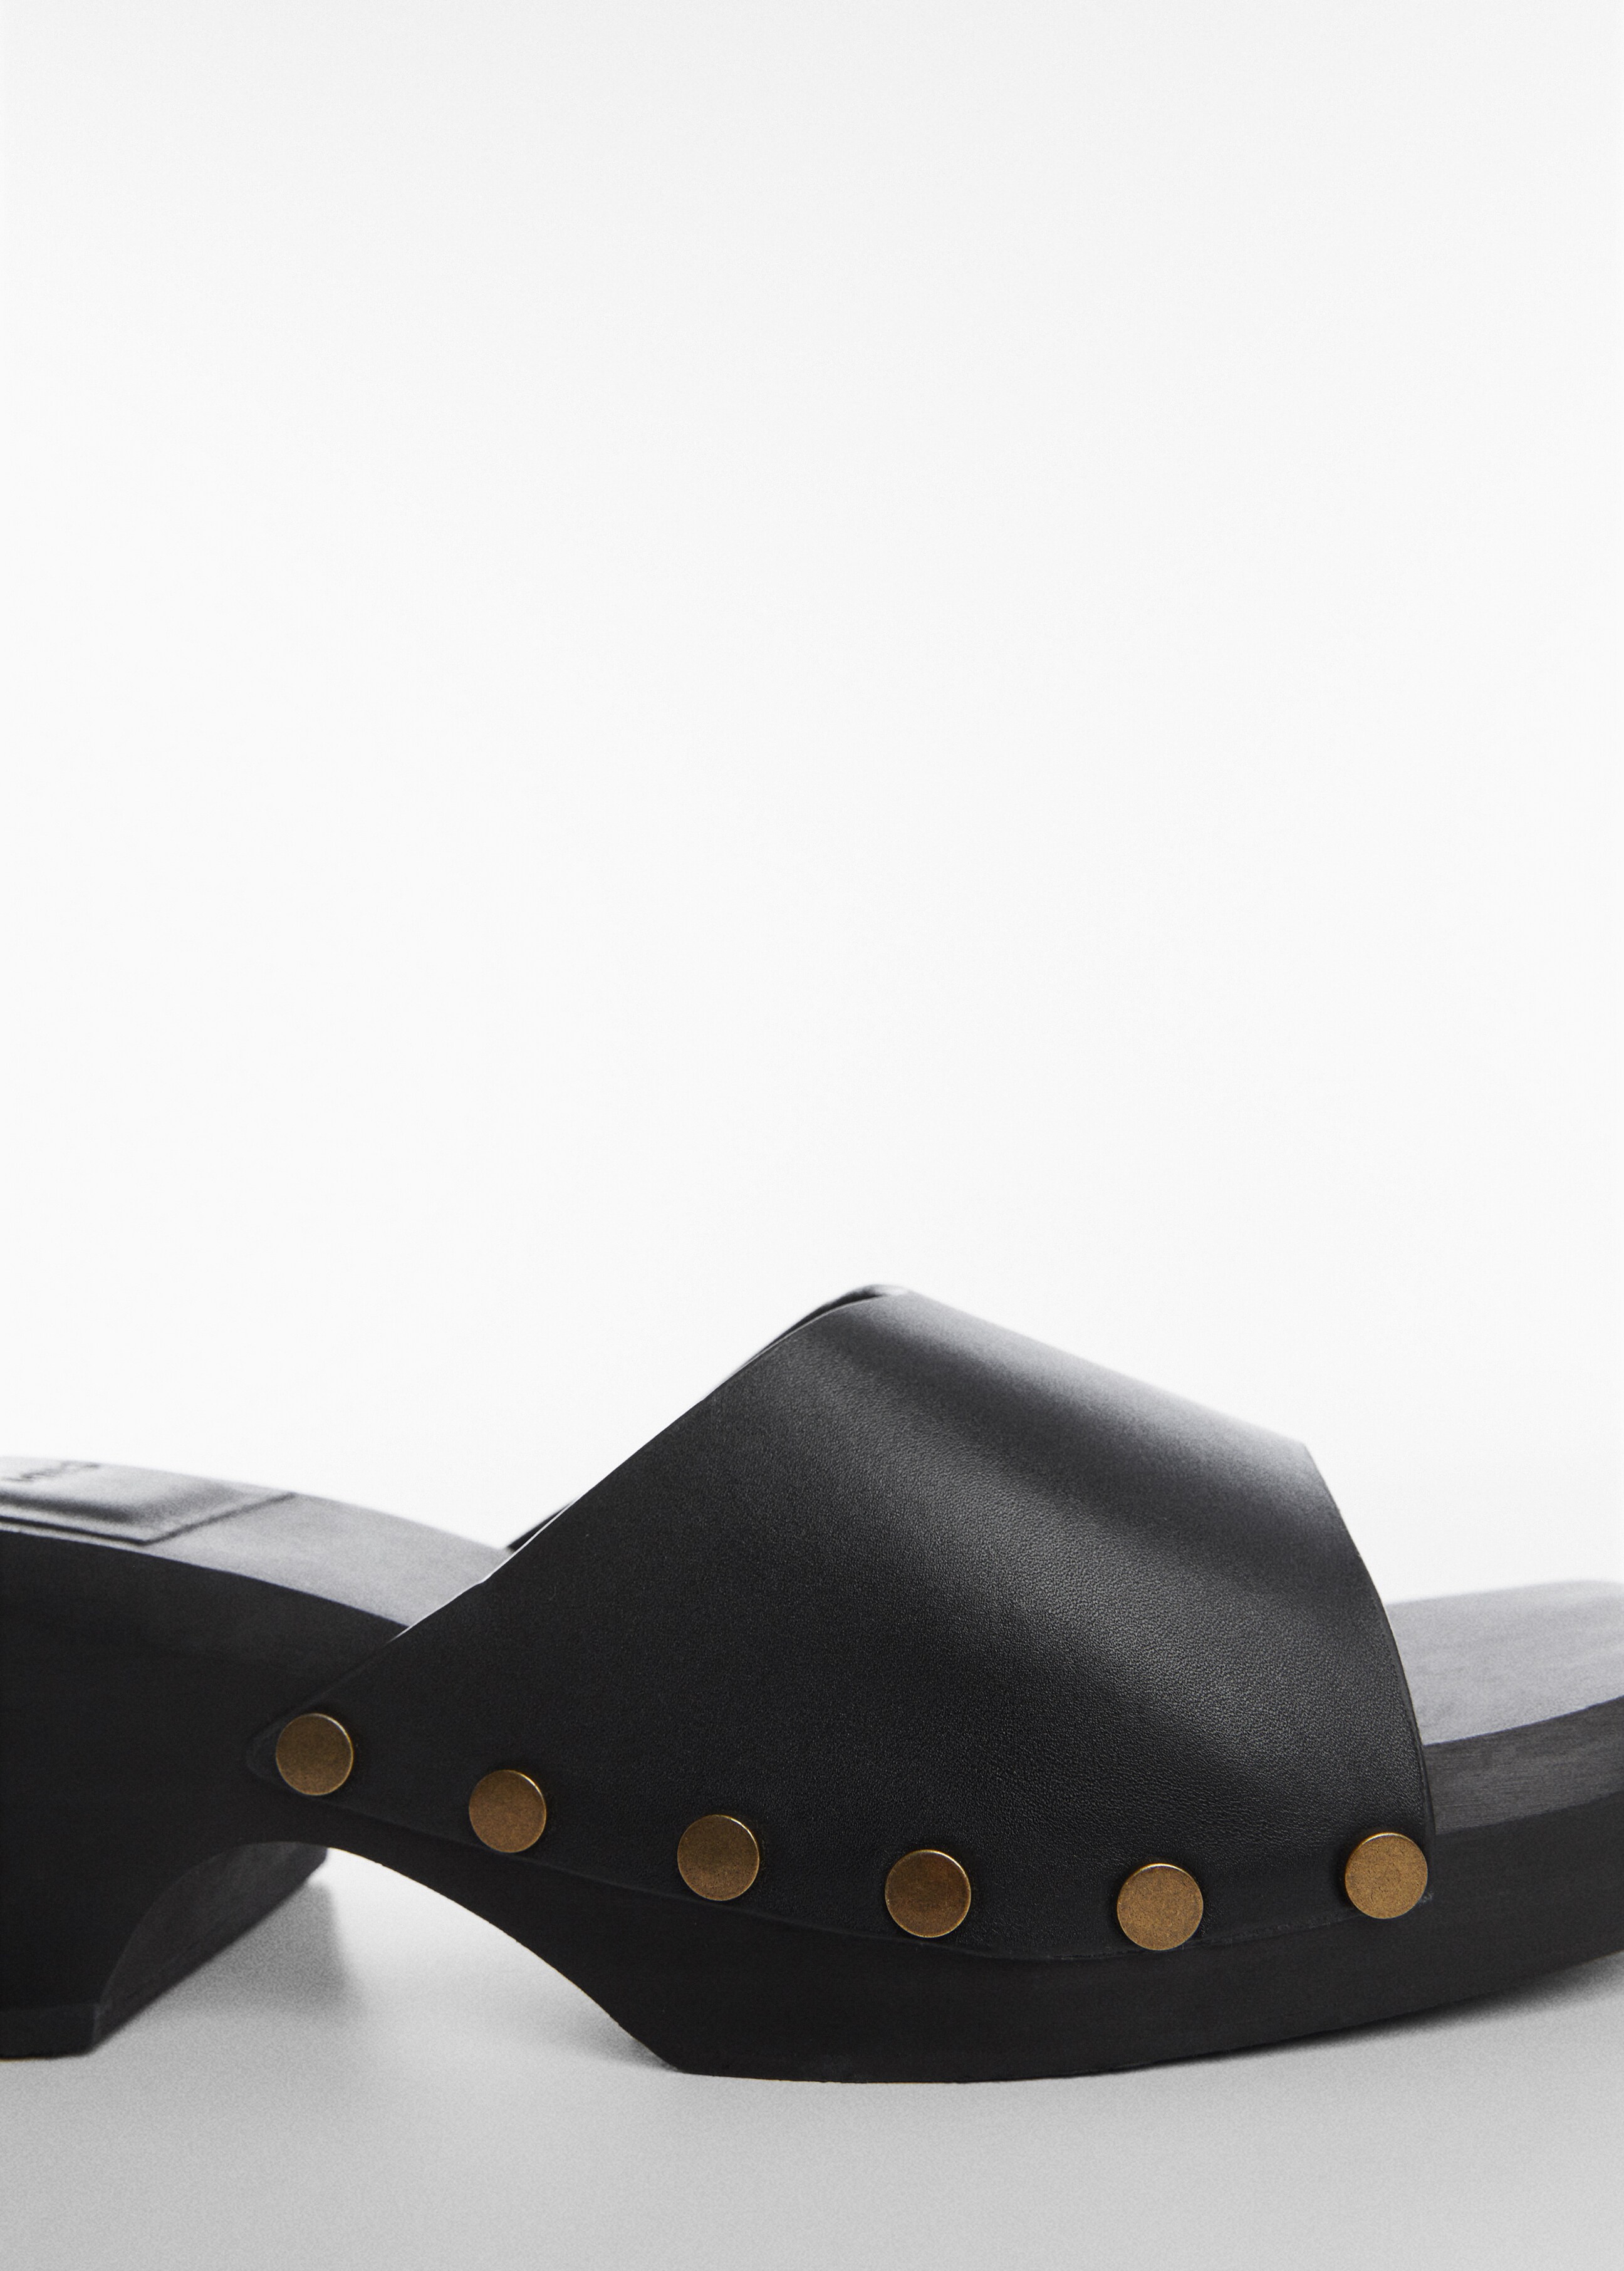 Studded leather clog - Details of the article 2